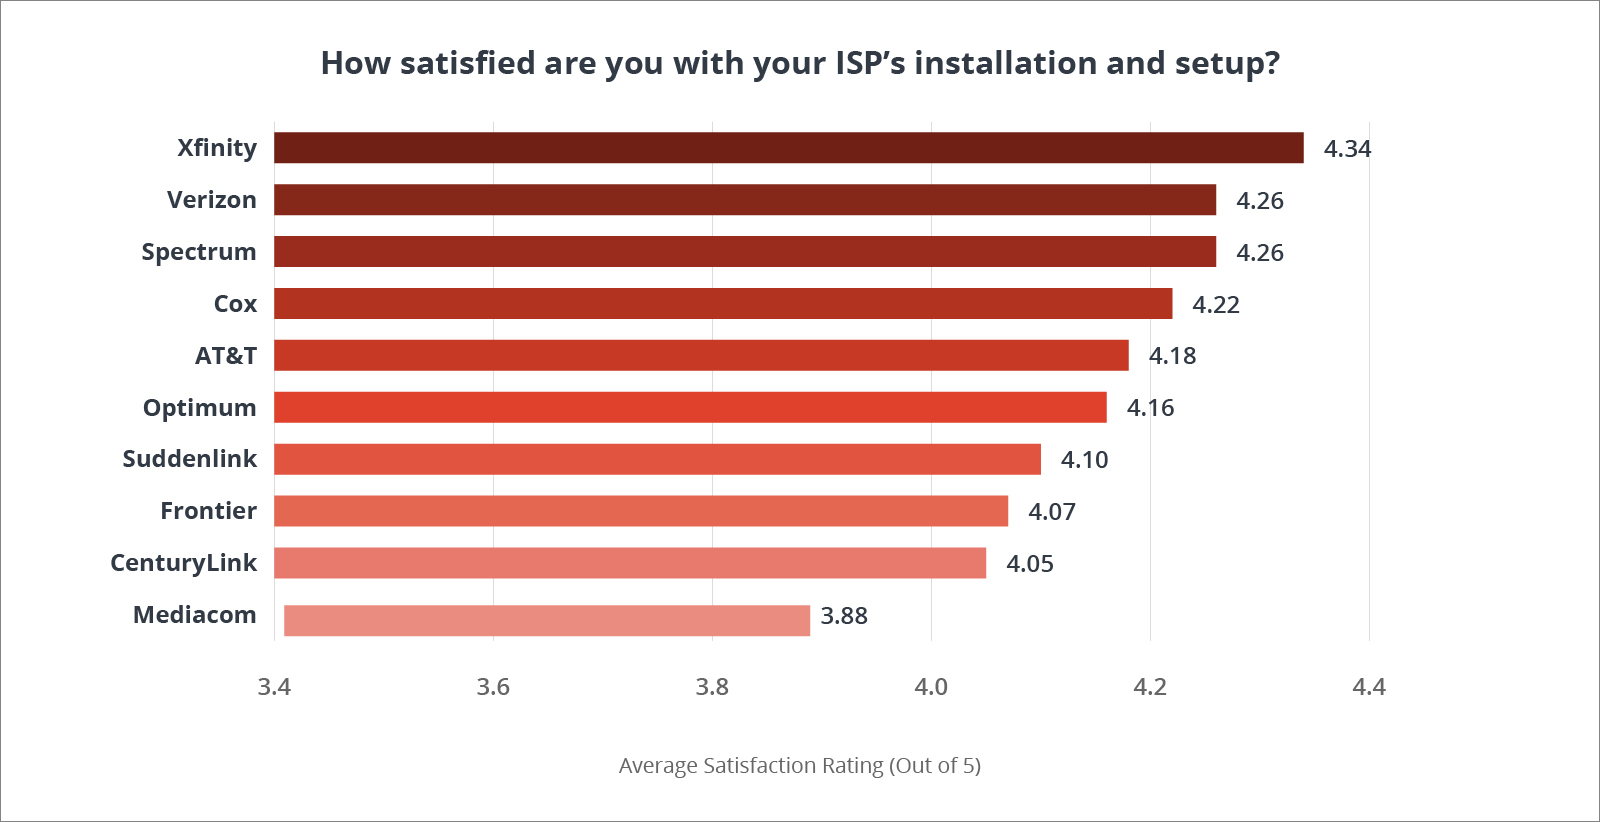 Chart ranking providers based on question, "How satisfied are you with your ISP's installation and setup?"